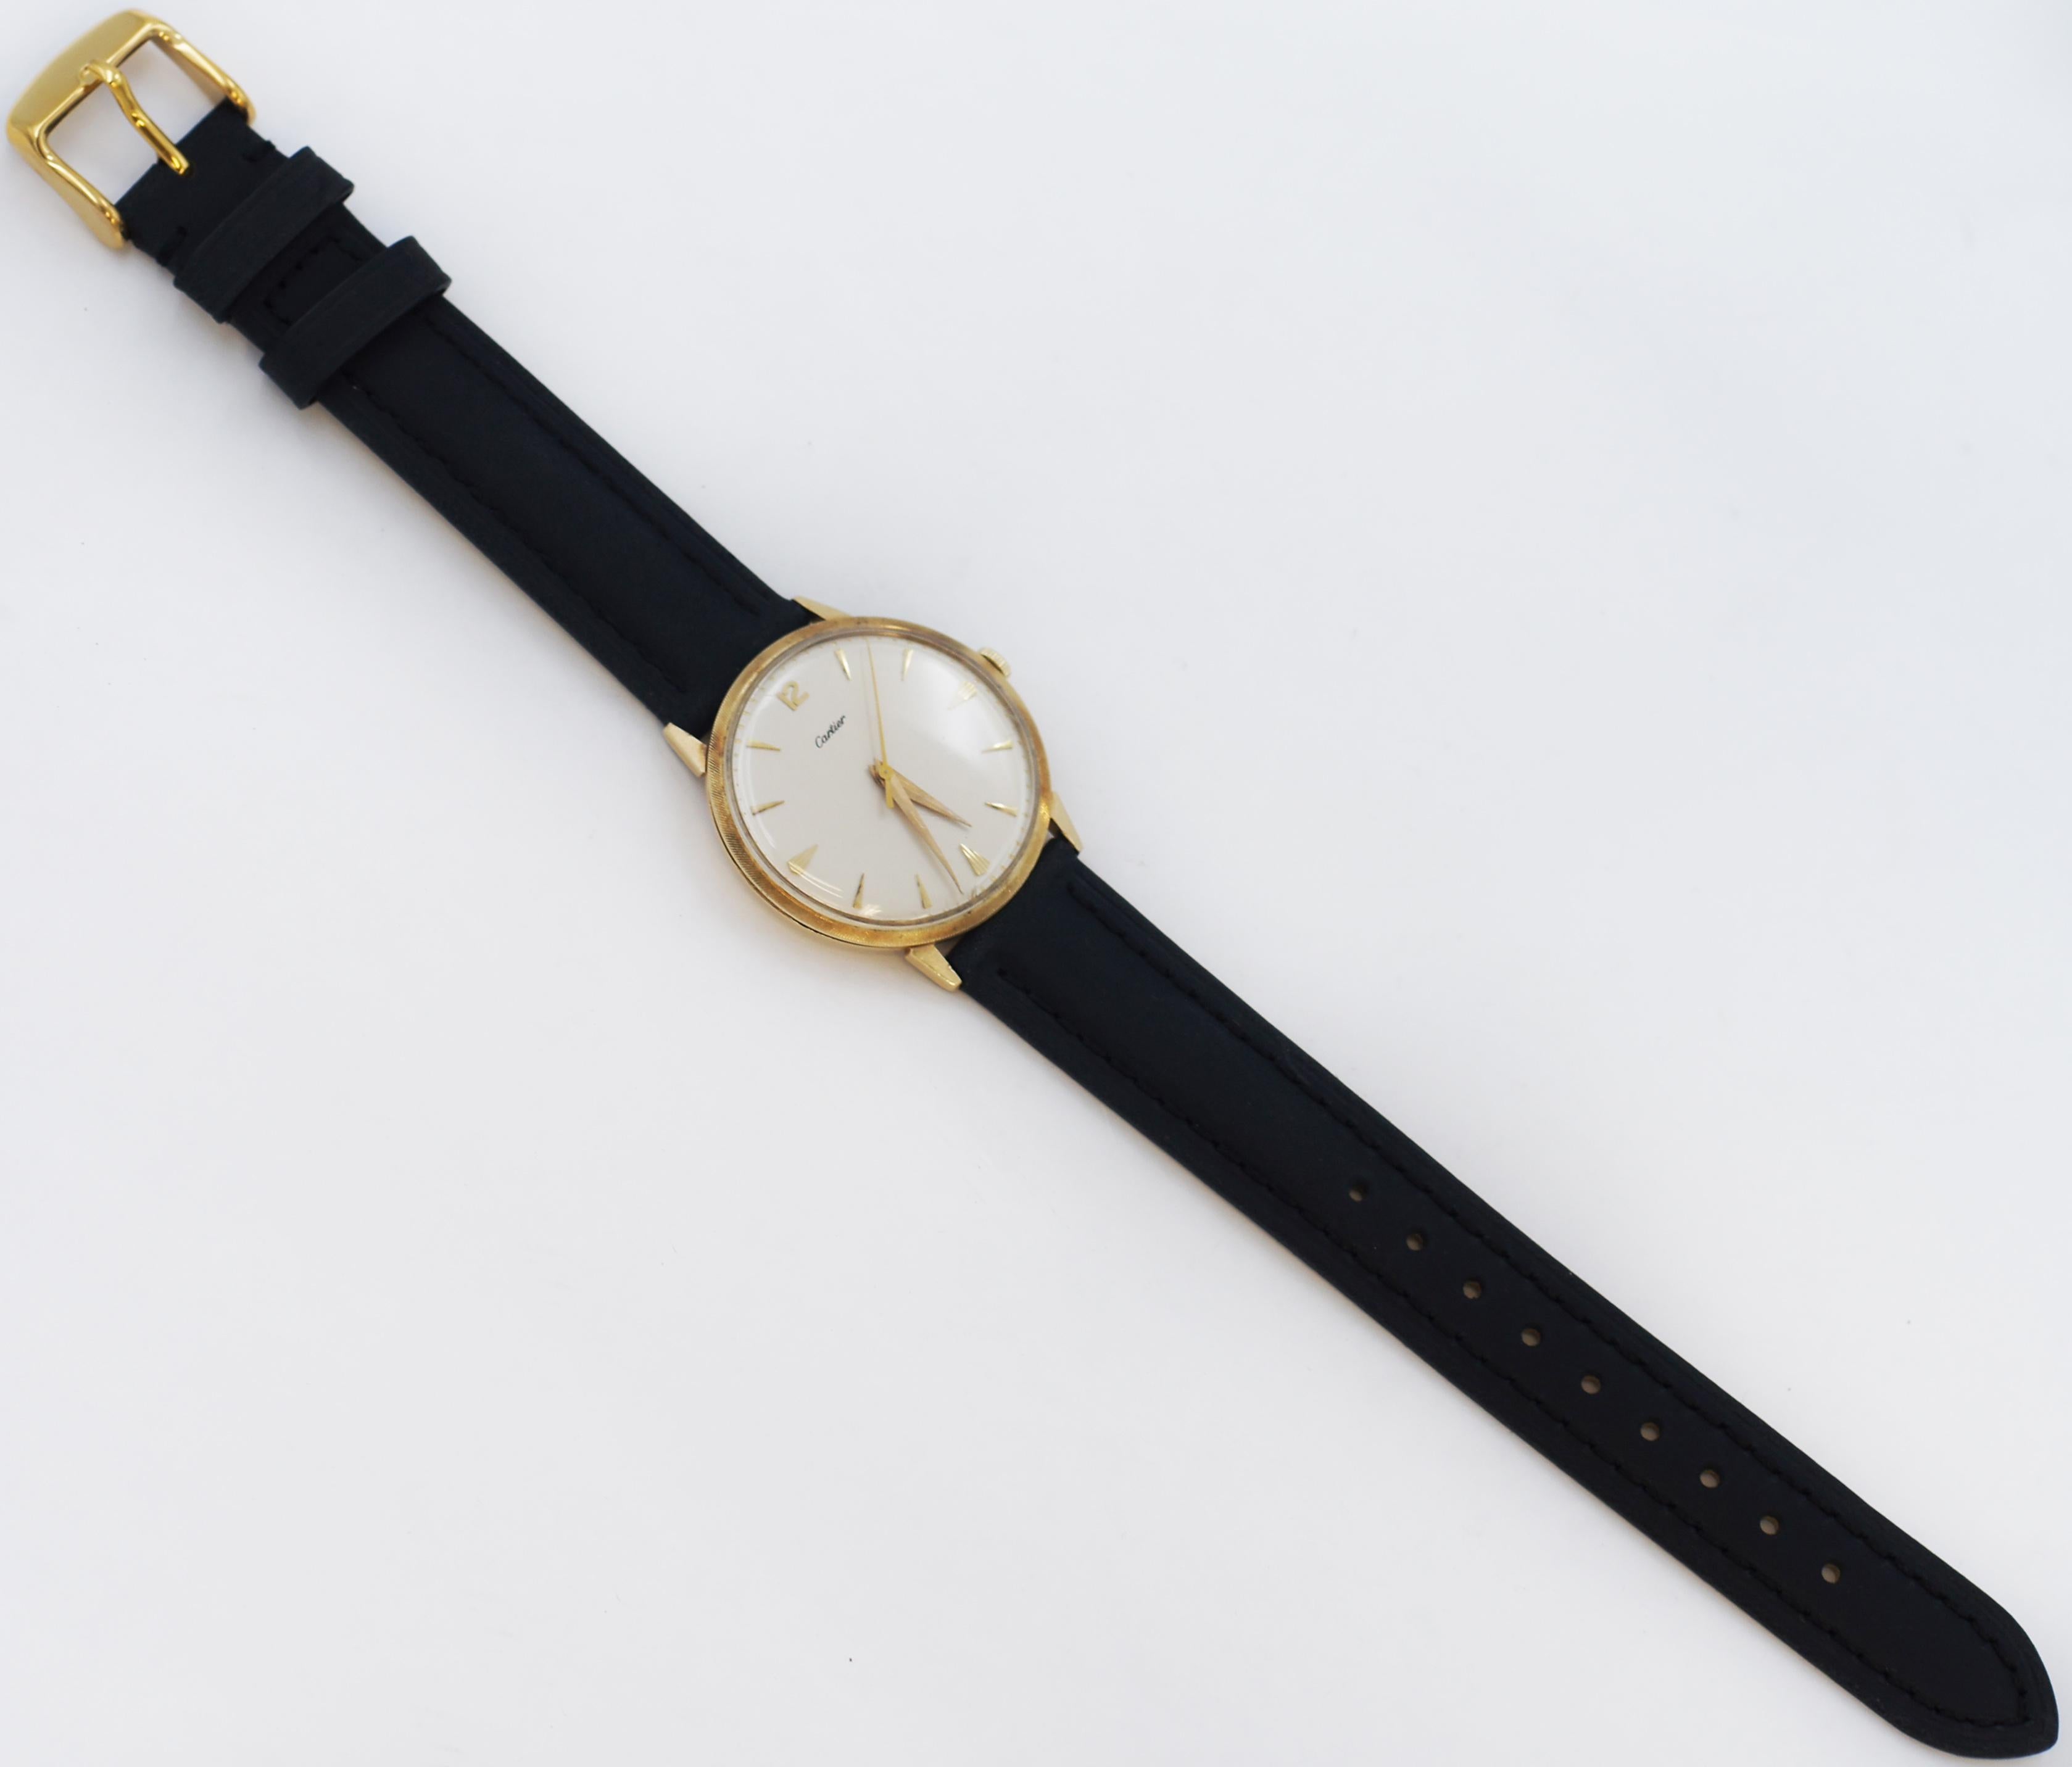 Introducing an extraordinary find - an exceptionally rare co-branded Cartier wristwatch crafted by Movado, approximately dating back to the 1940s. 
This exquisitely handmade timepiece is a testament to the artistry of the era. As Cartier and Movado